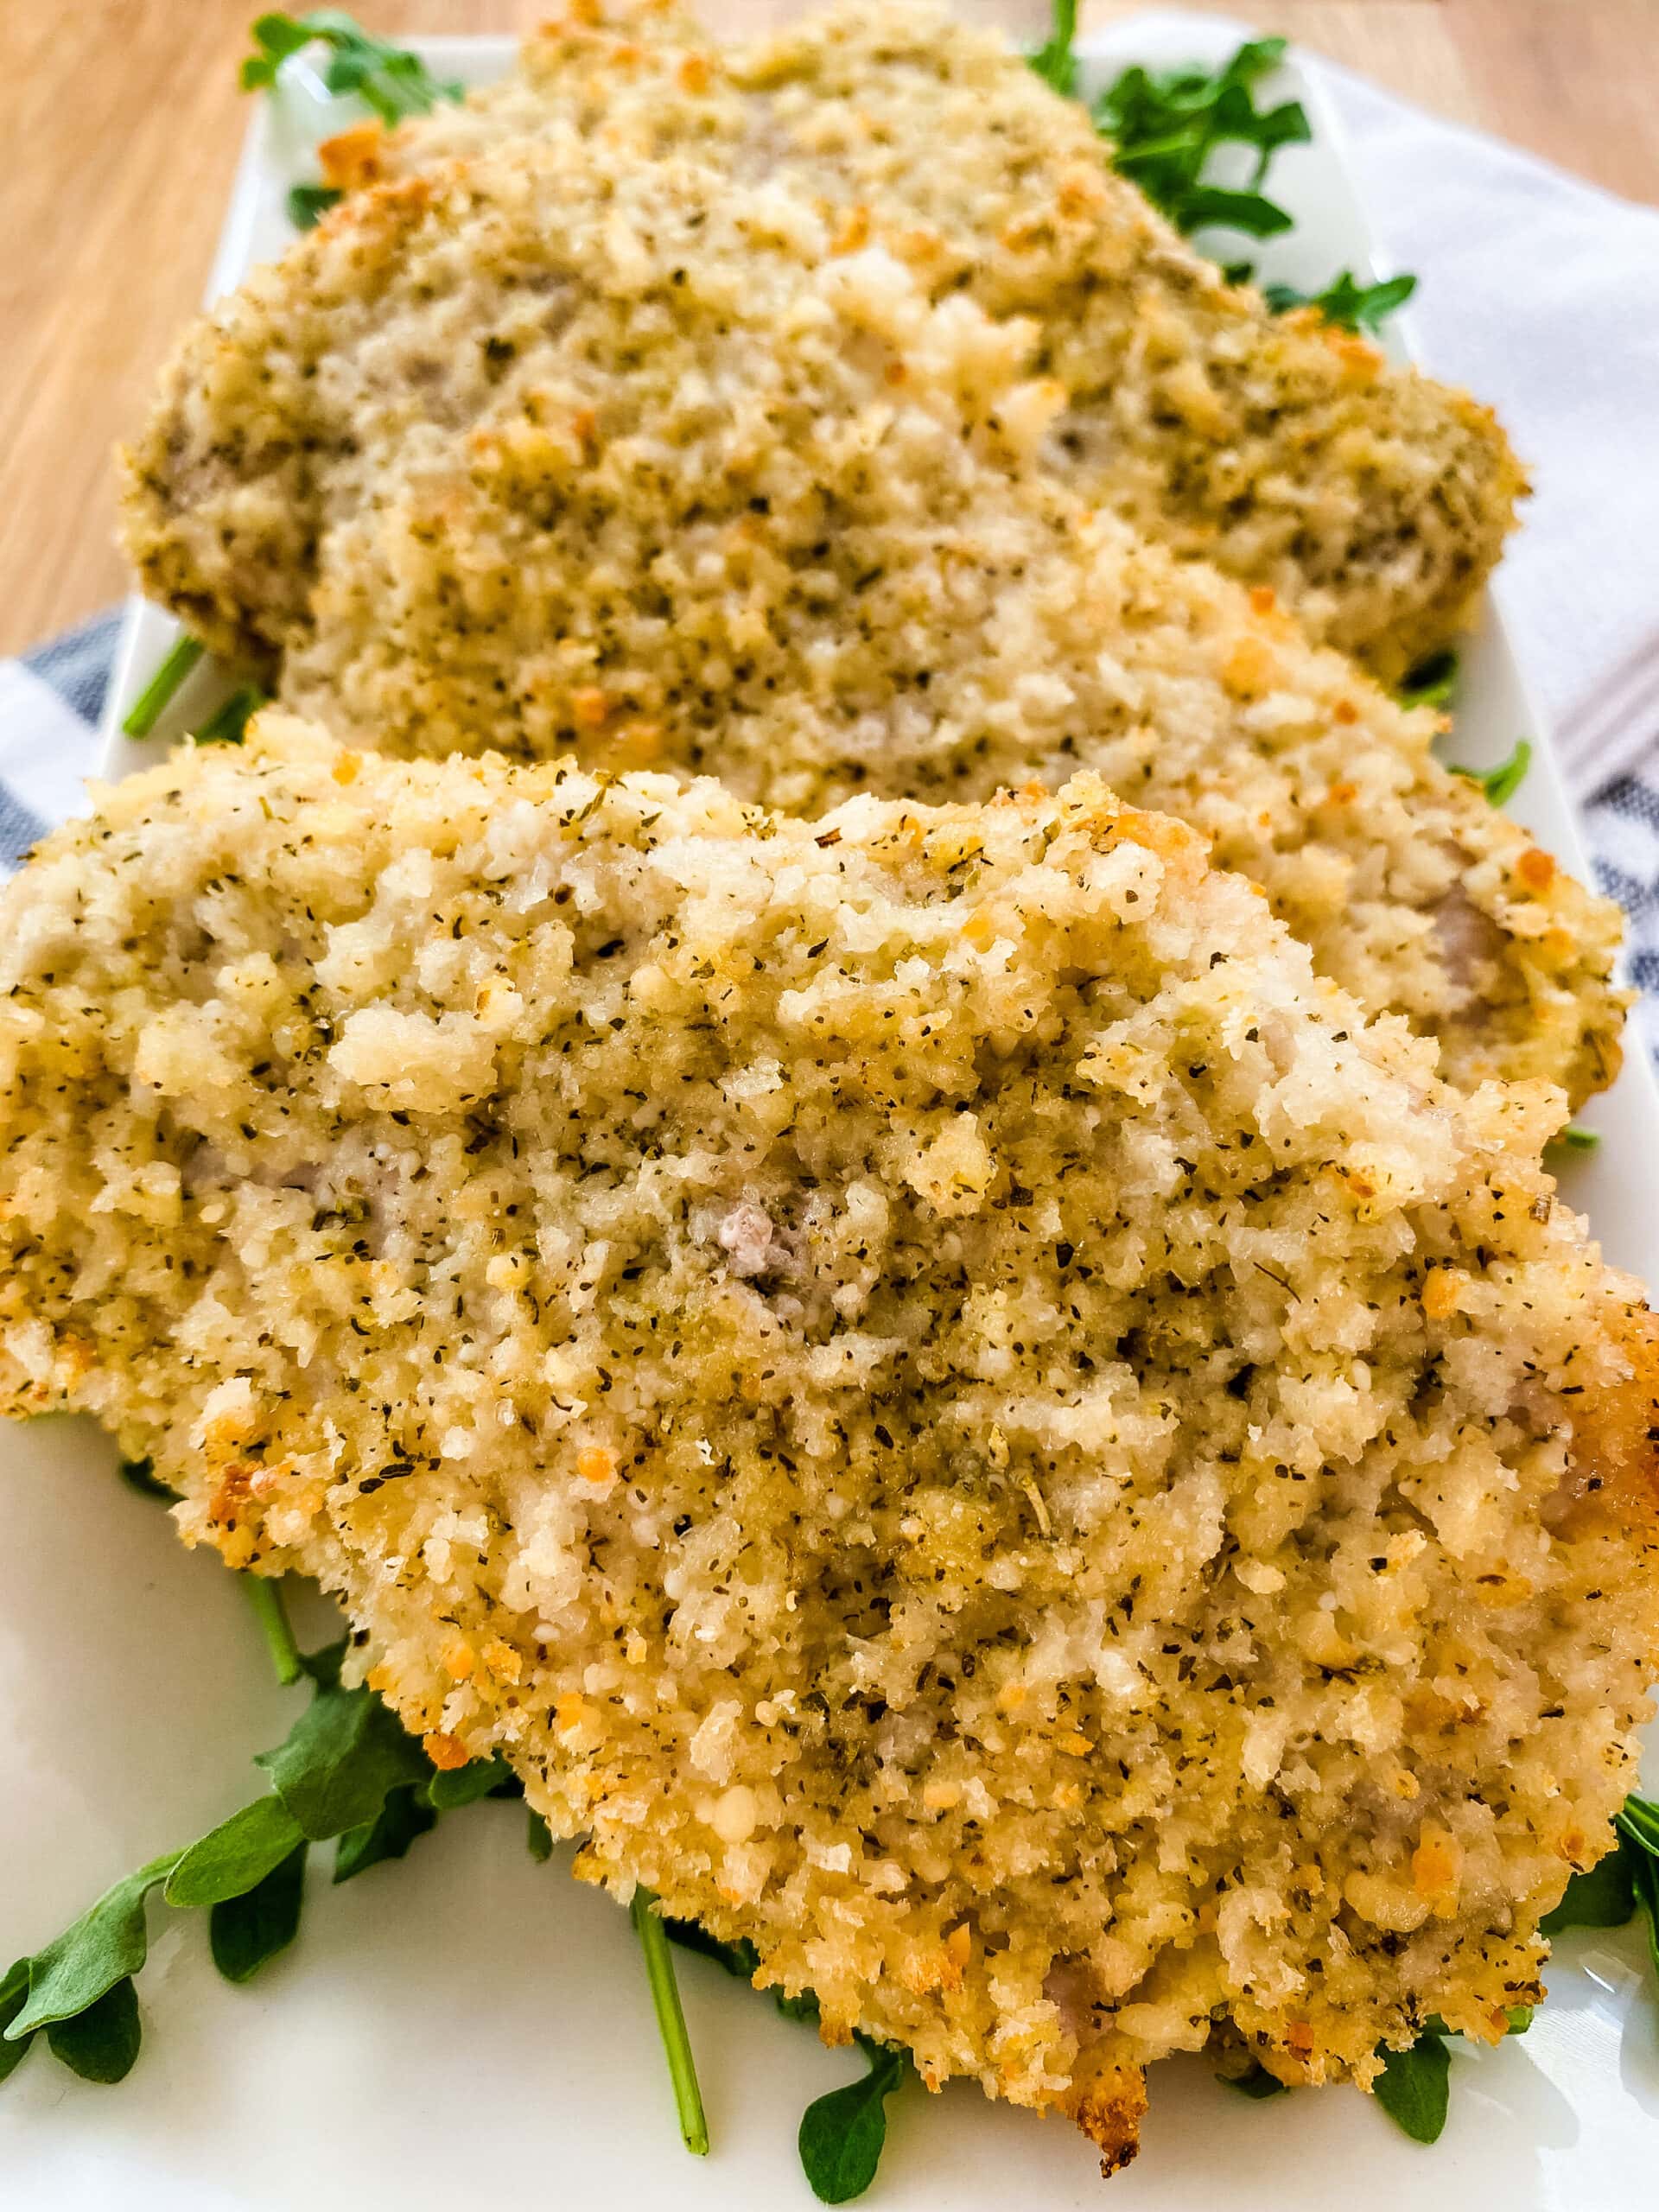 Plate with Parmesan Crusted Pork Chops. Cooking With Fudge